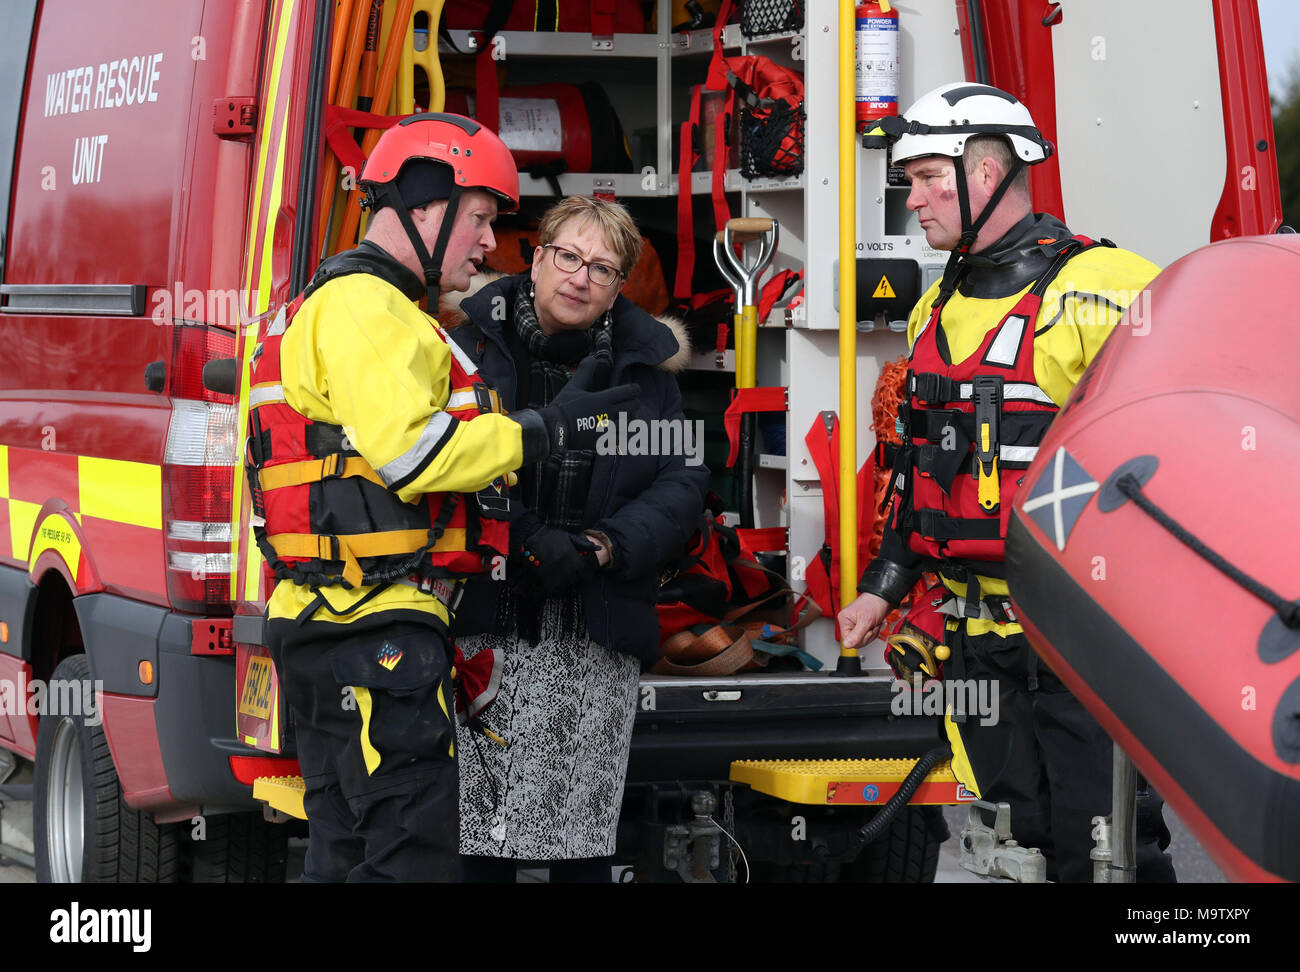 Community Safety Minister Annabelle Ewing chats with firemen Scott Westworth(L) and Gary Barker from Bathgate fire station after she was given a live water rescue demonstration at Falkirk's Helix Park, as she helps mark five years of the Scottish Fire and Rescue Service. Stock Photo